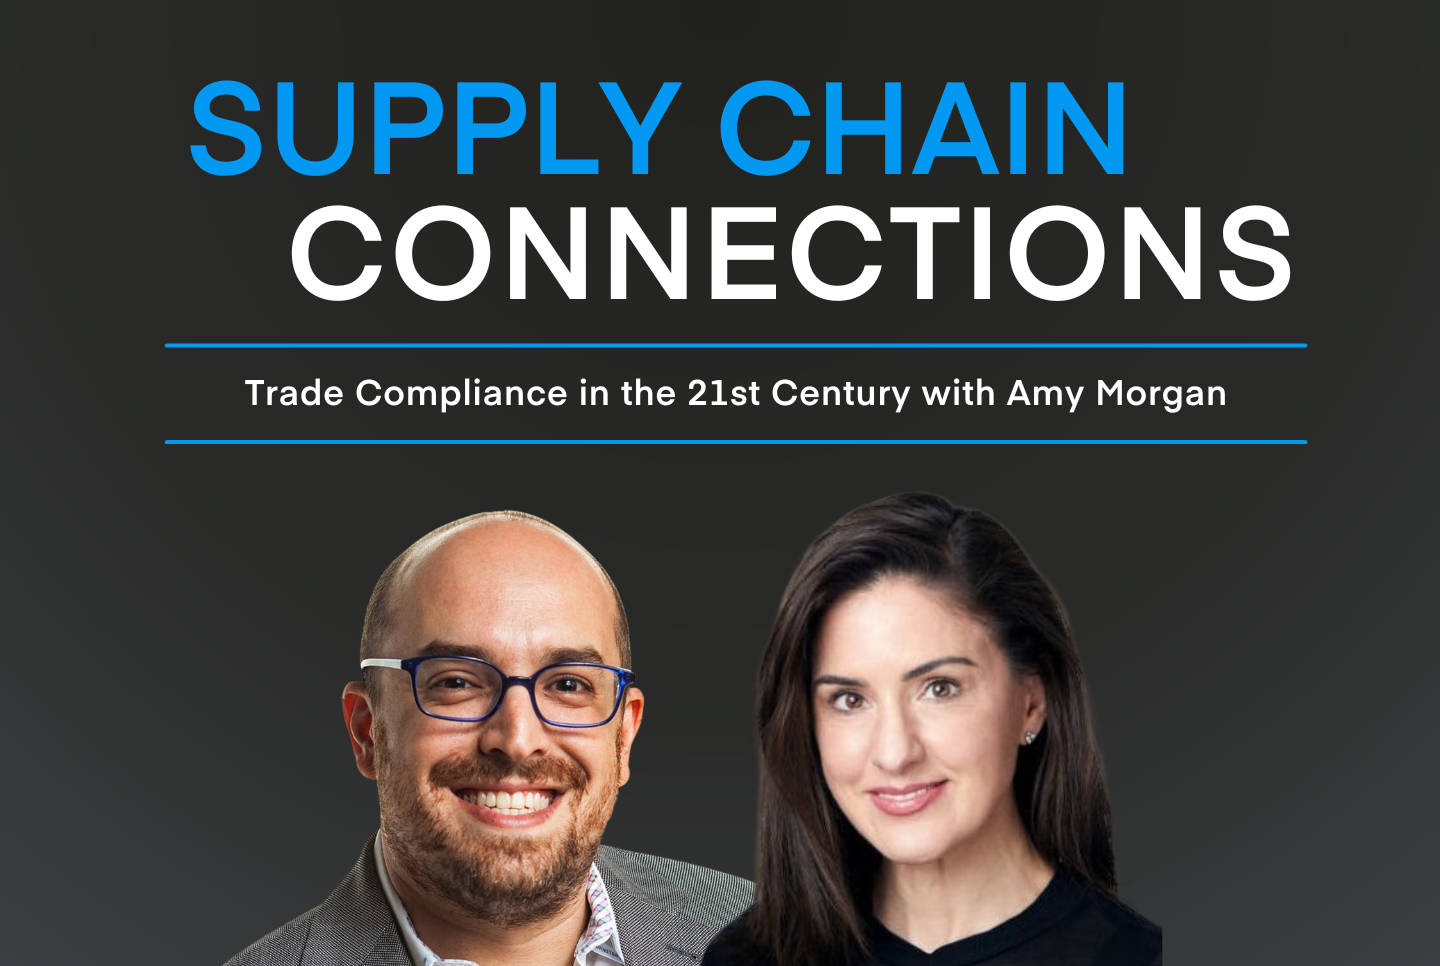 Trade Compliance in the 21st Century with Amy Morgan